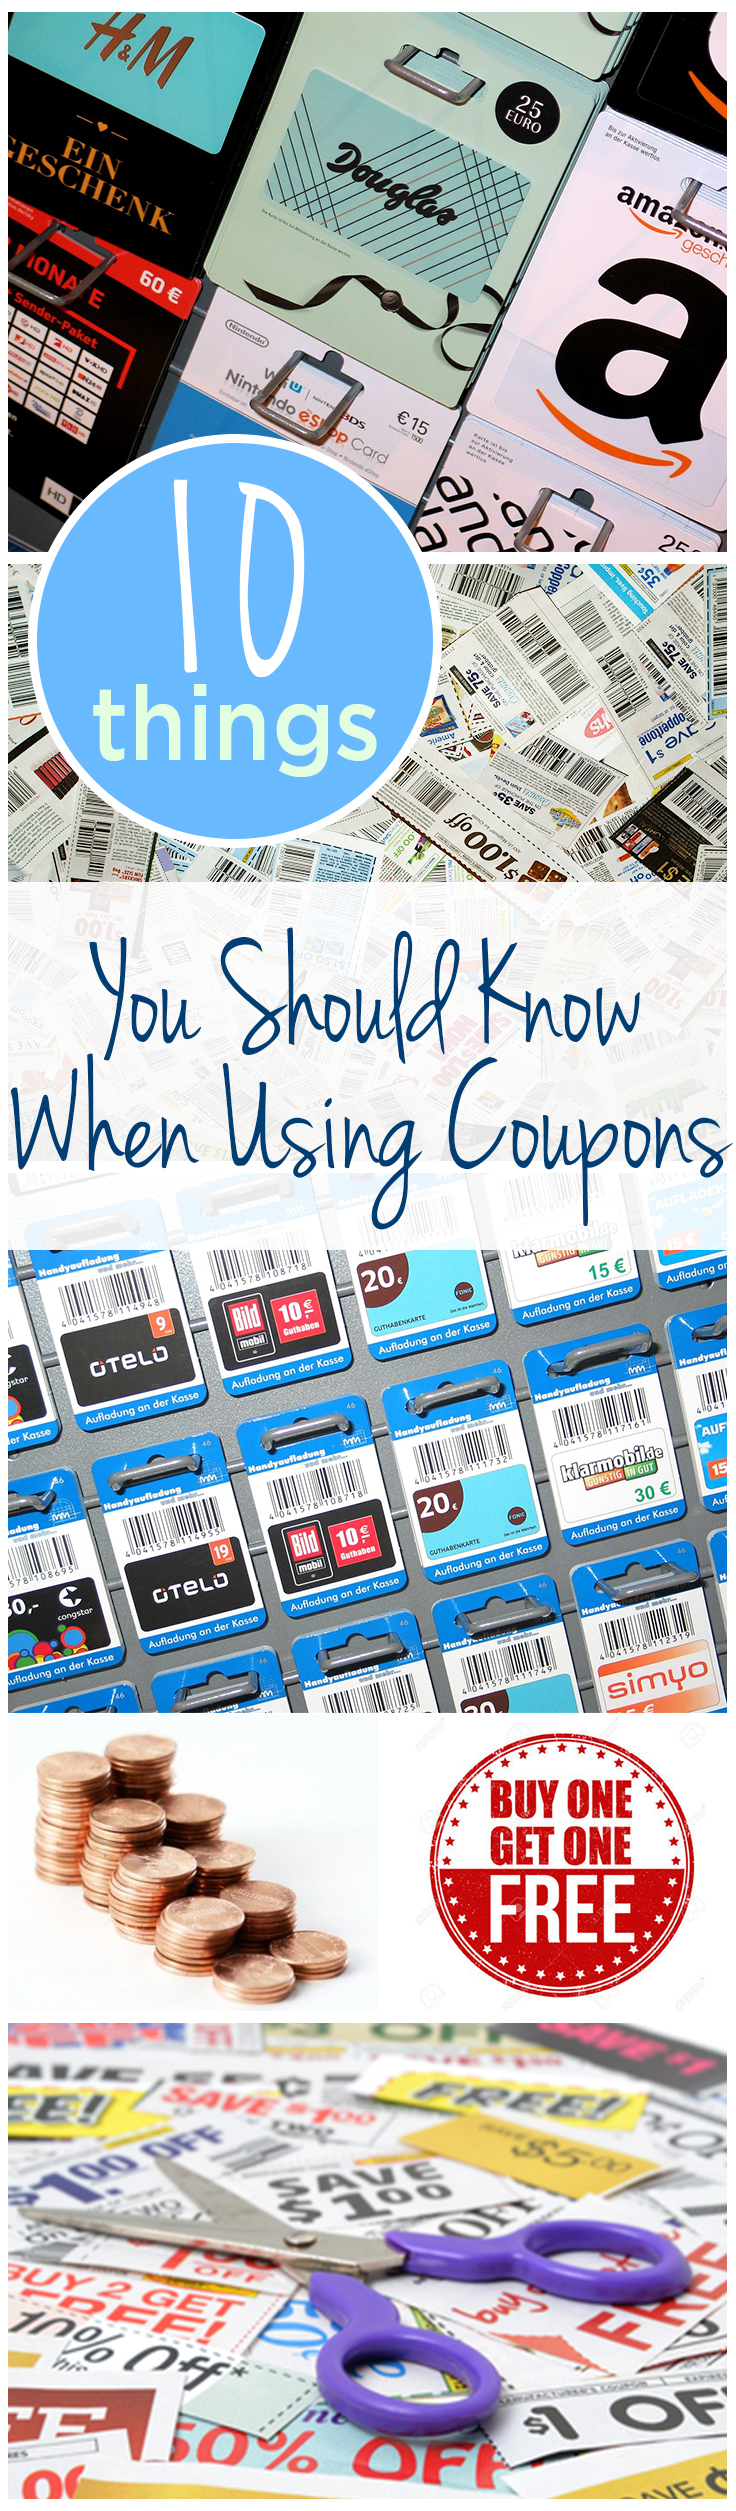 10 Things You Should Know When Using Coupons 